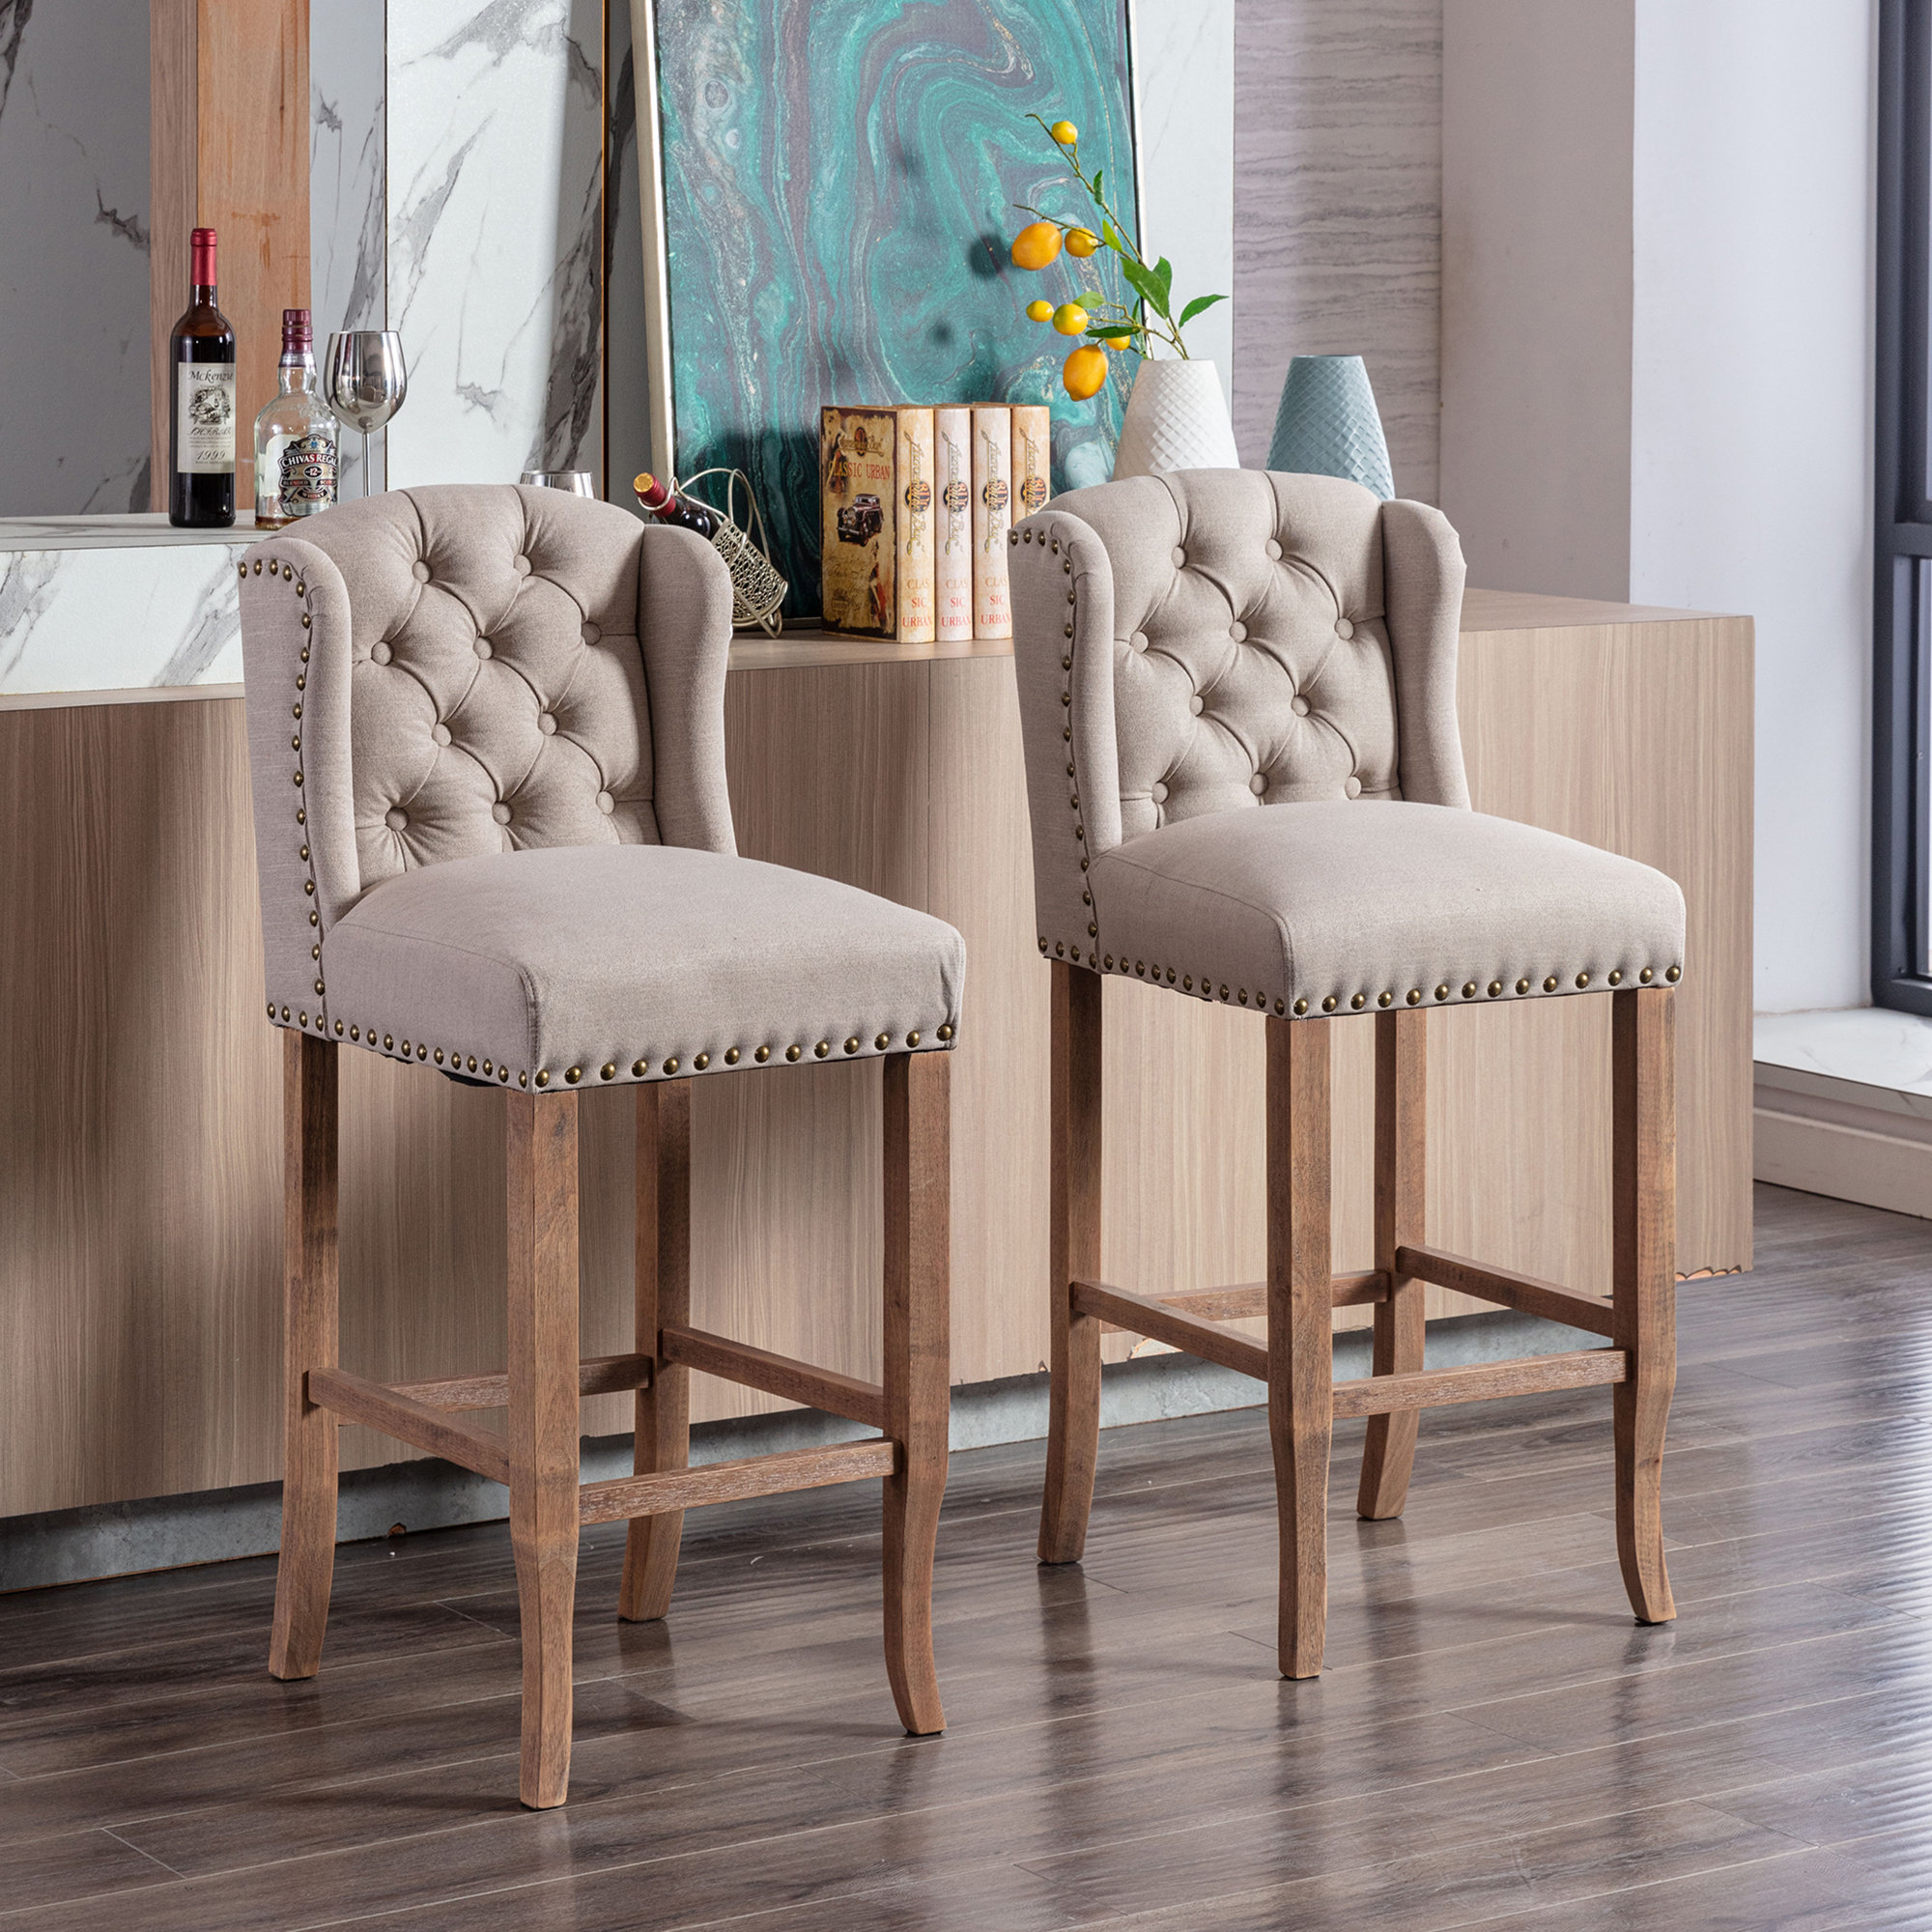 Otteridge Upholstered Counter Height Bar Stools Breakfast Chairs With Nailhead Trim Wood Legs 